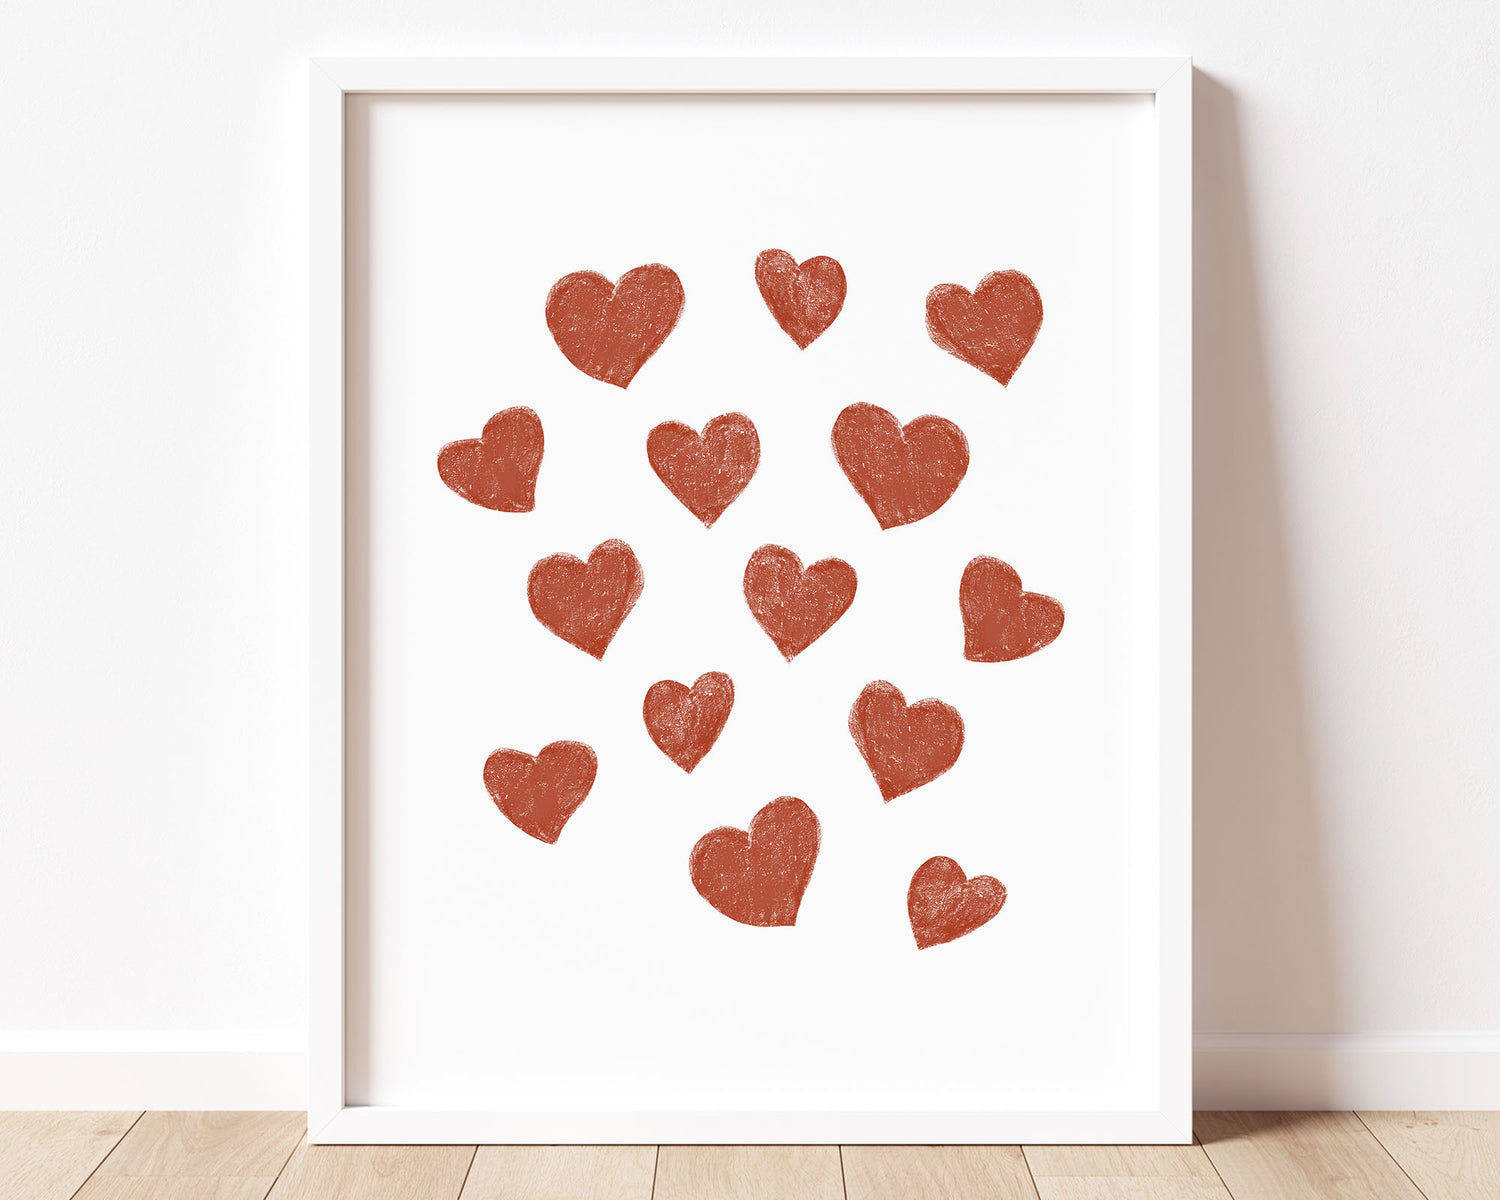 Burnt orange small scattered hearts in chalky brushstroke illlustration style perfect for Baby Nursery Décor, Little Boys Bedroom Wall Art, Toddler Girls Room Wall Hangings, Kiddos Bathroom Wall Art and Childrens Playroom Décor.